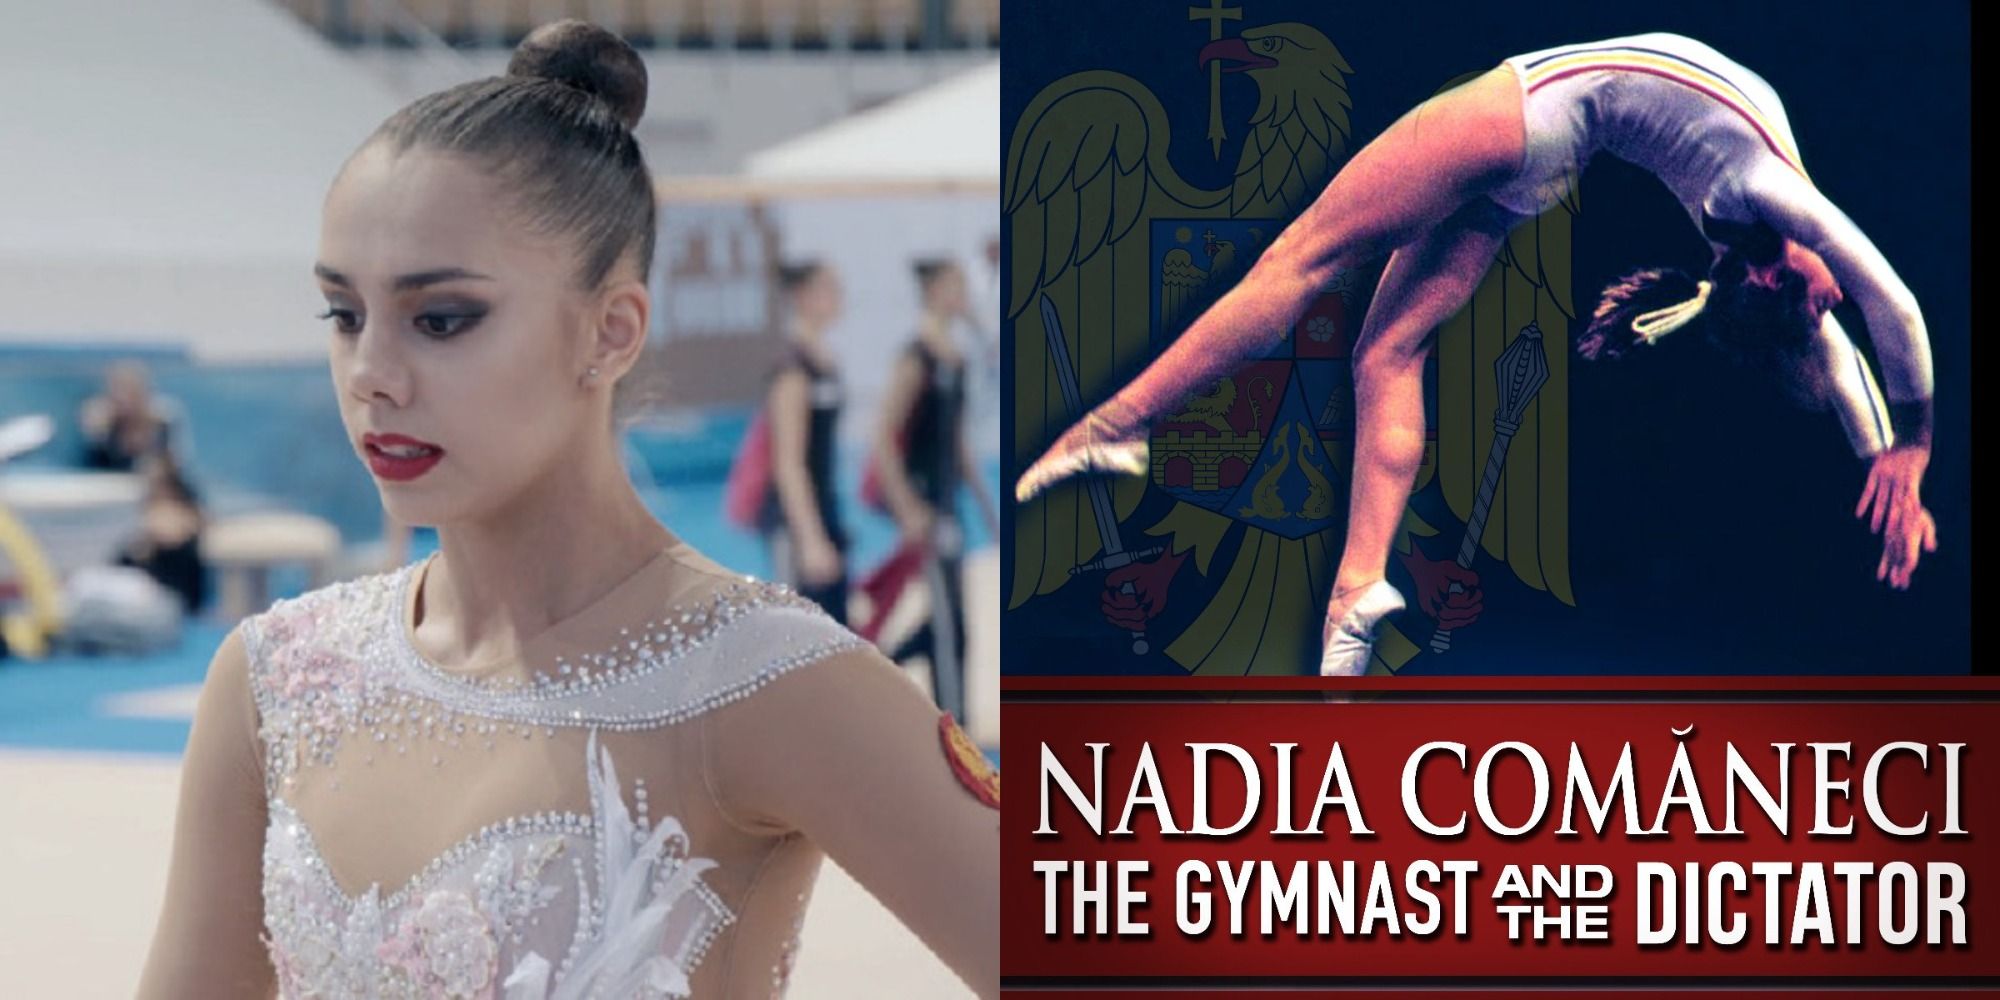 An image of Margarita Mamun in Over The Limit and Nadia Comaneci in The Gymnast and the Dictator